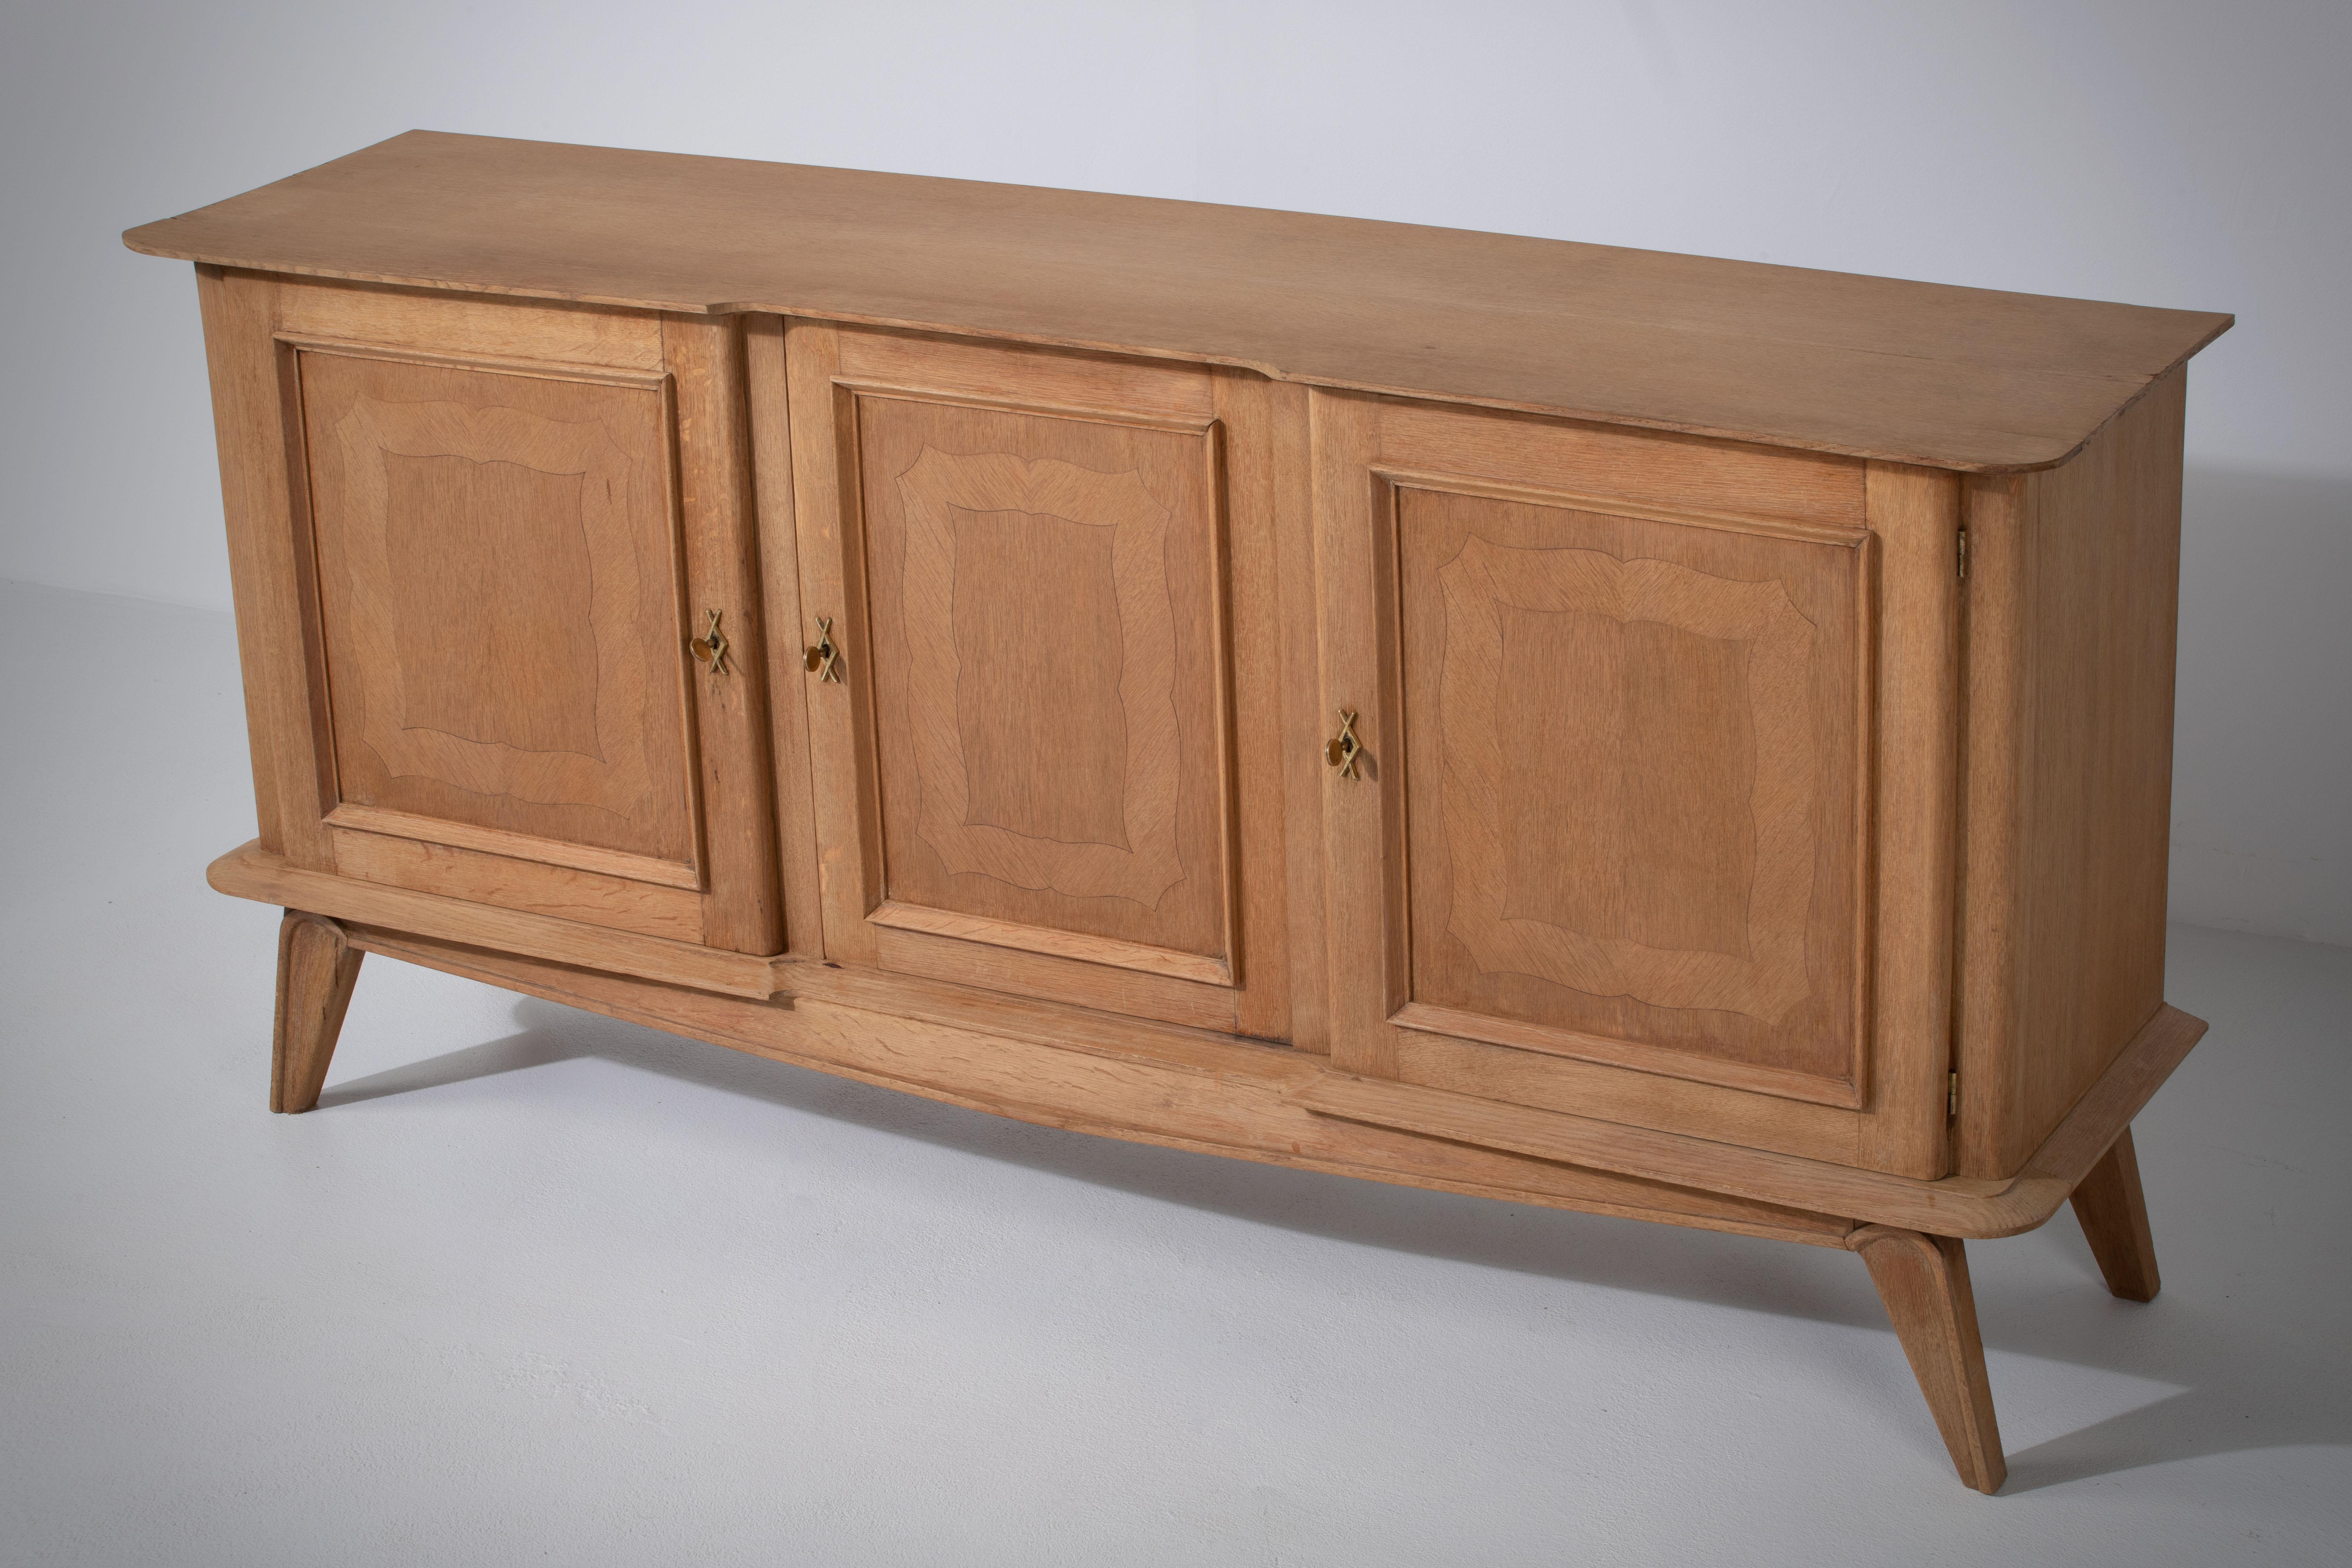 Elegant credenza, Oak, France, 1940s.
Large Art Deco Brutalist sideboard. 
The credenza consists of three storage facilities covered with rich wood grain.
Good condition.